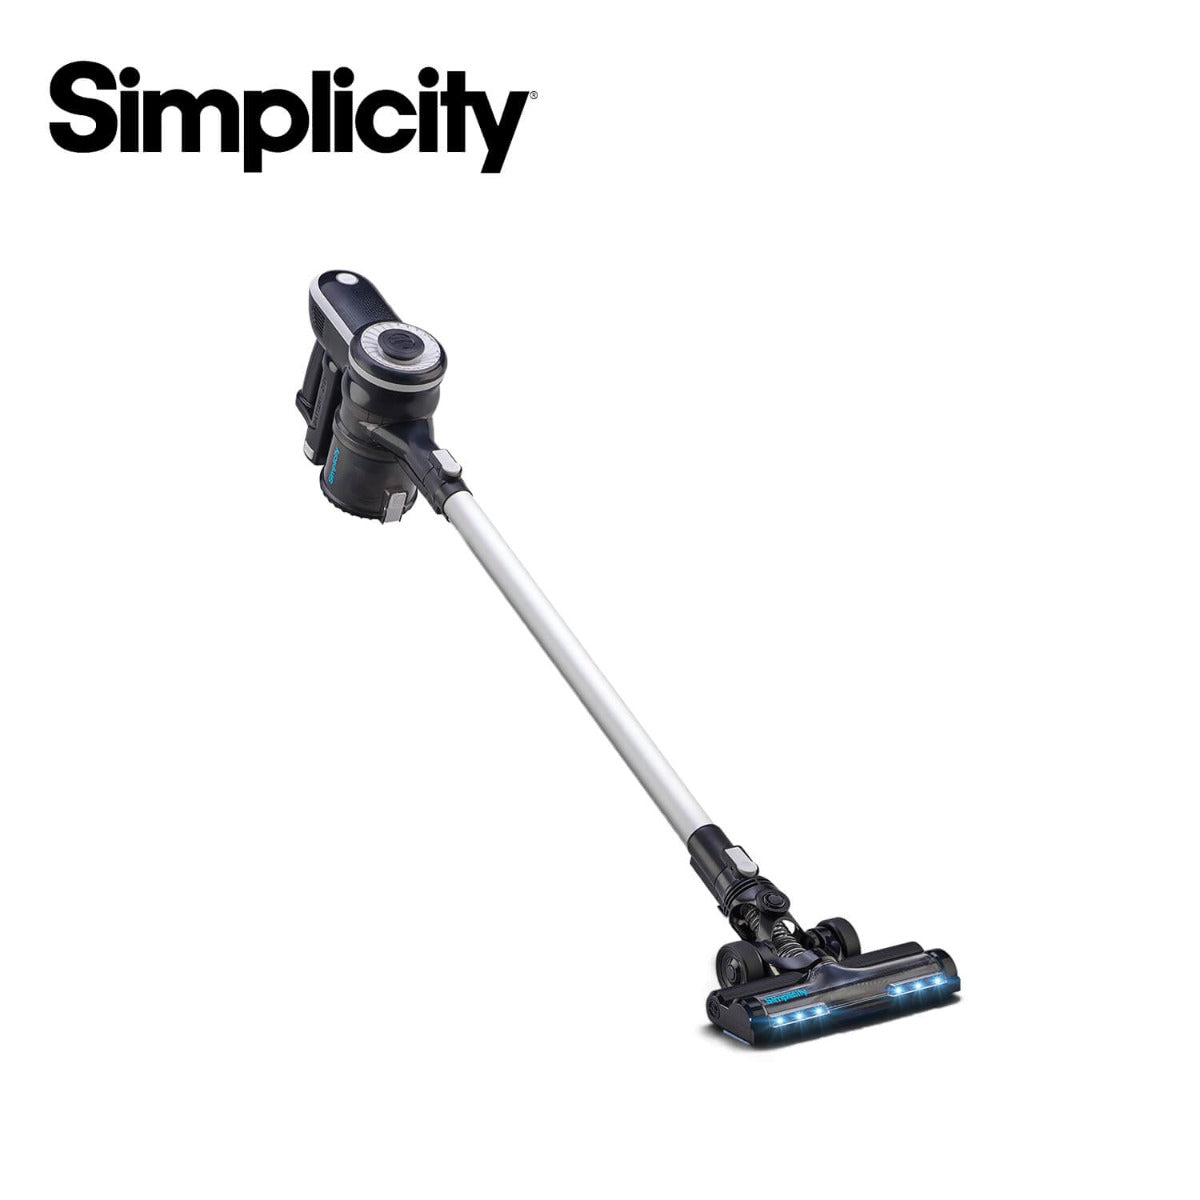 Crevice Tool and Dusting Brush Combo for S65 Stick Vacuum